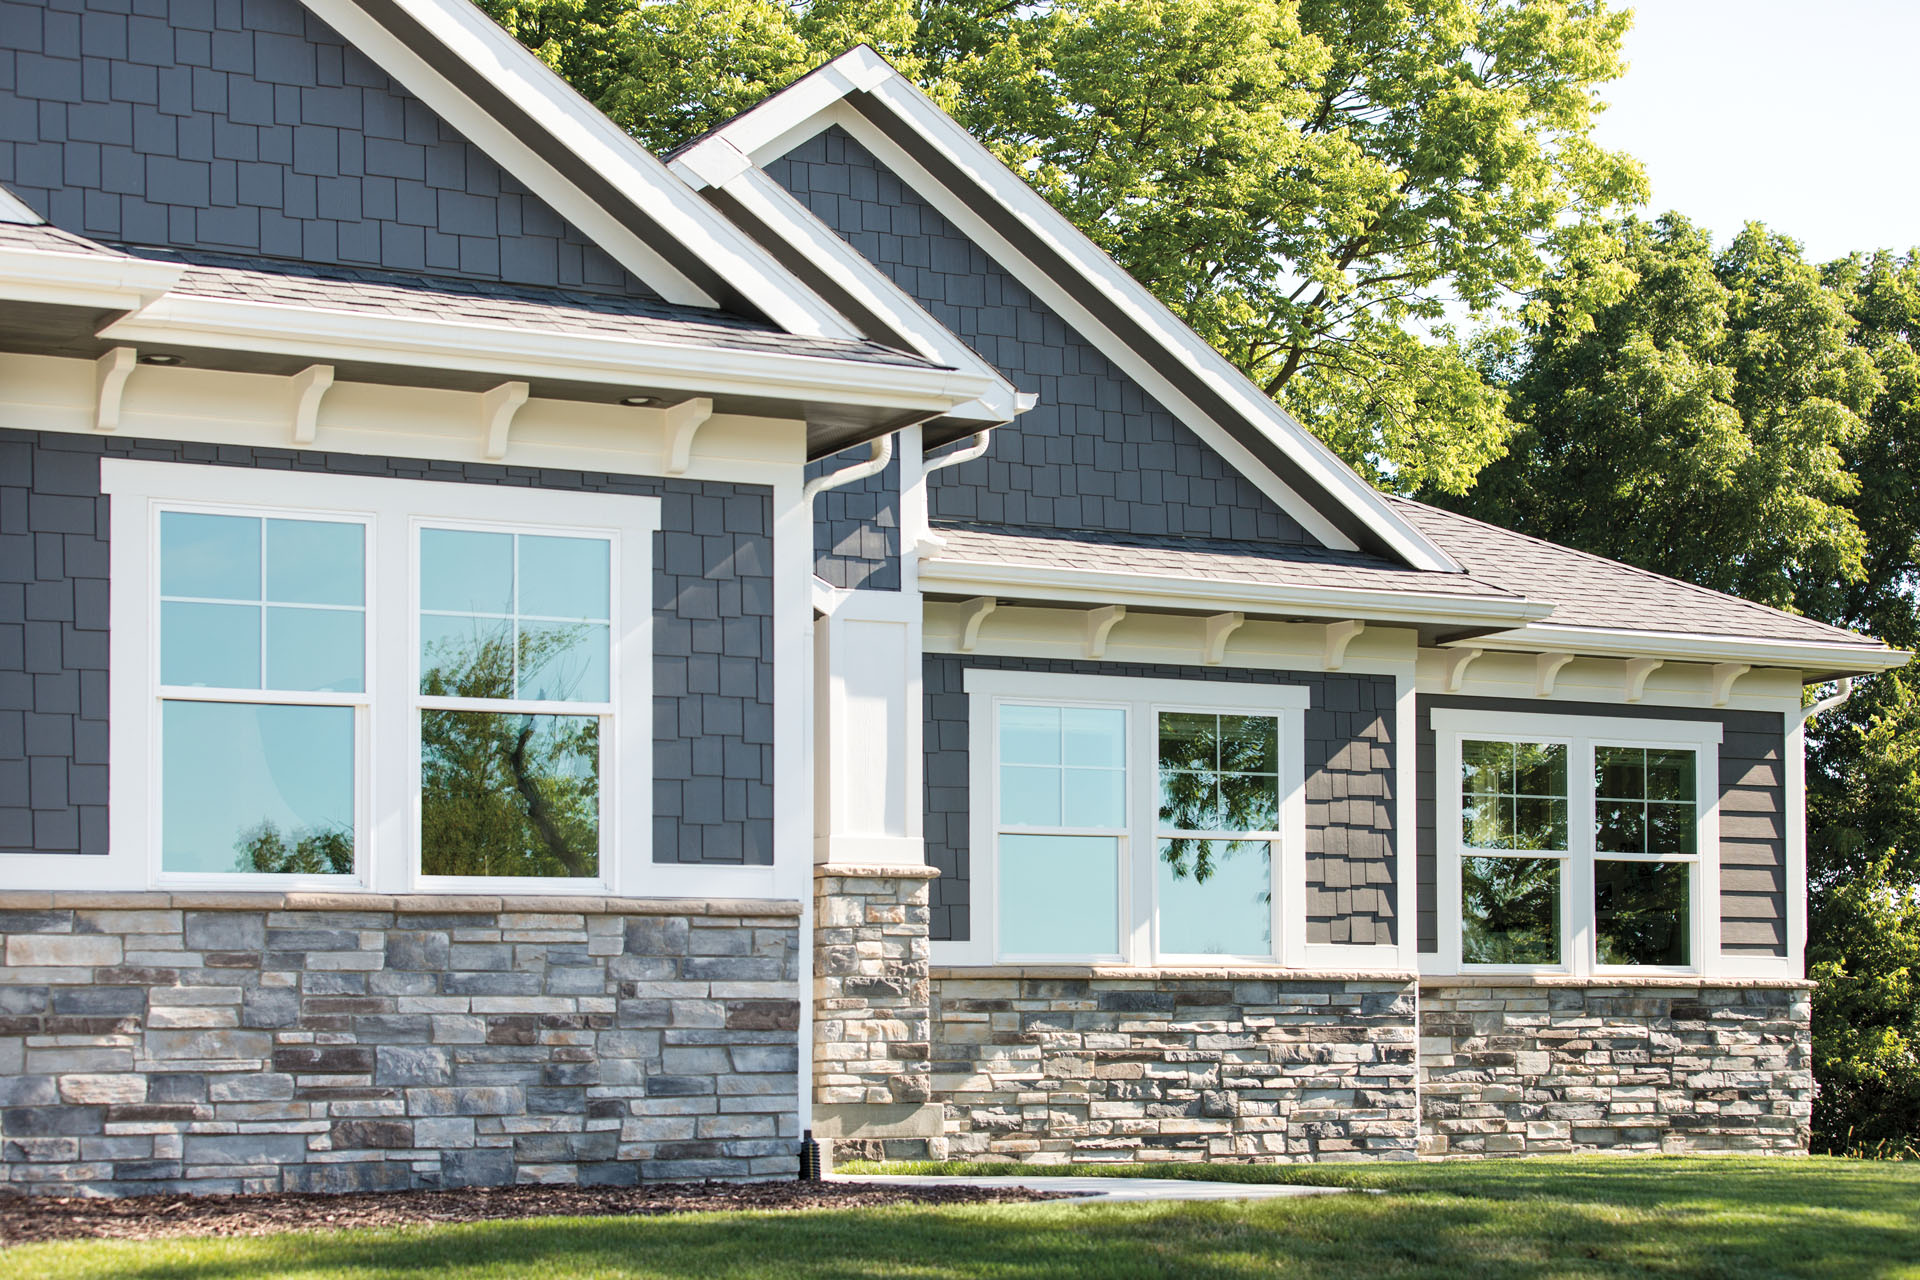 The lovely exterior of a modern home, featuring sparkling windows and new siding.